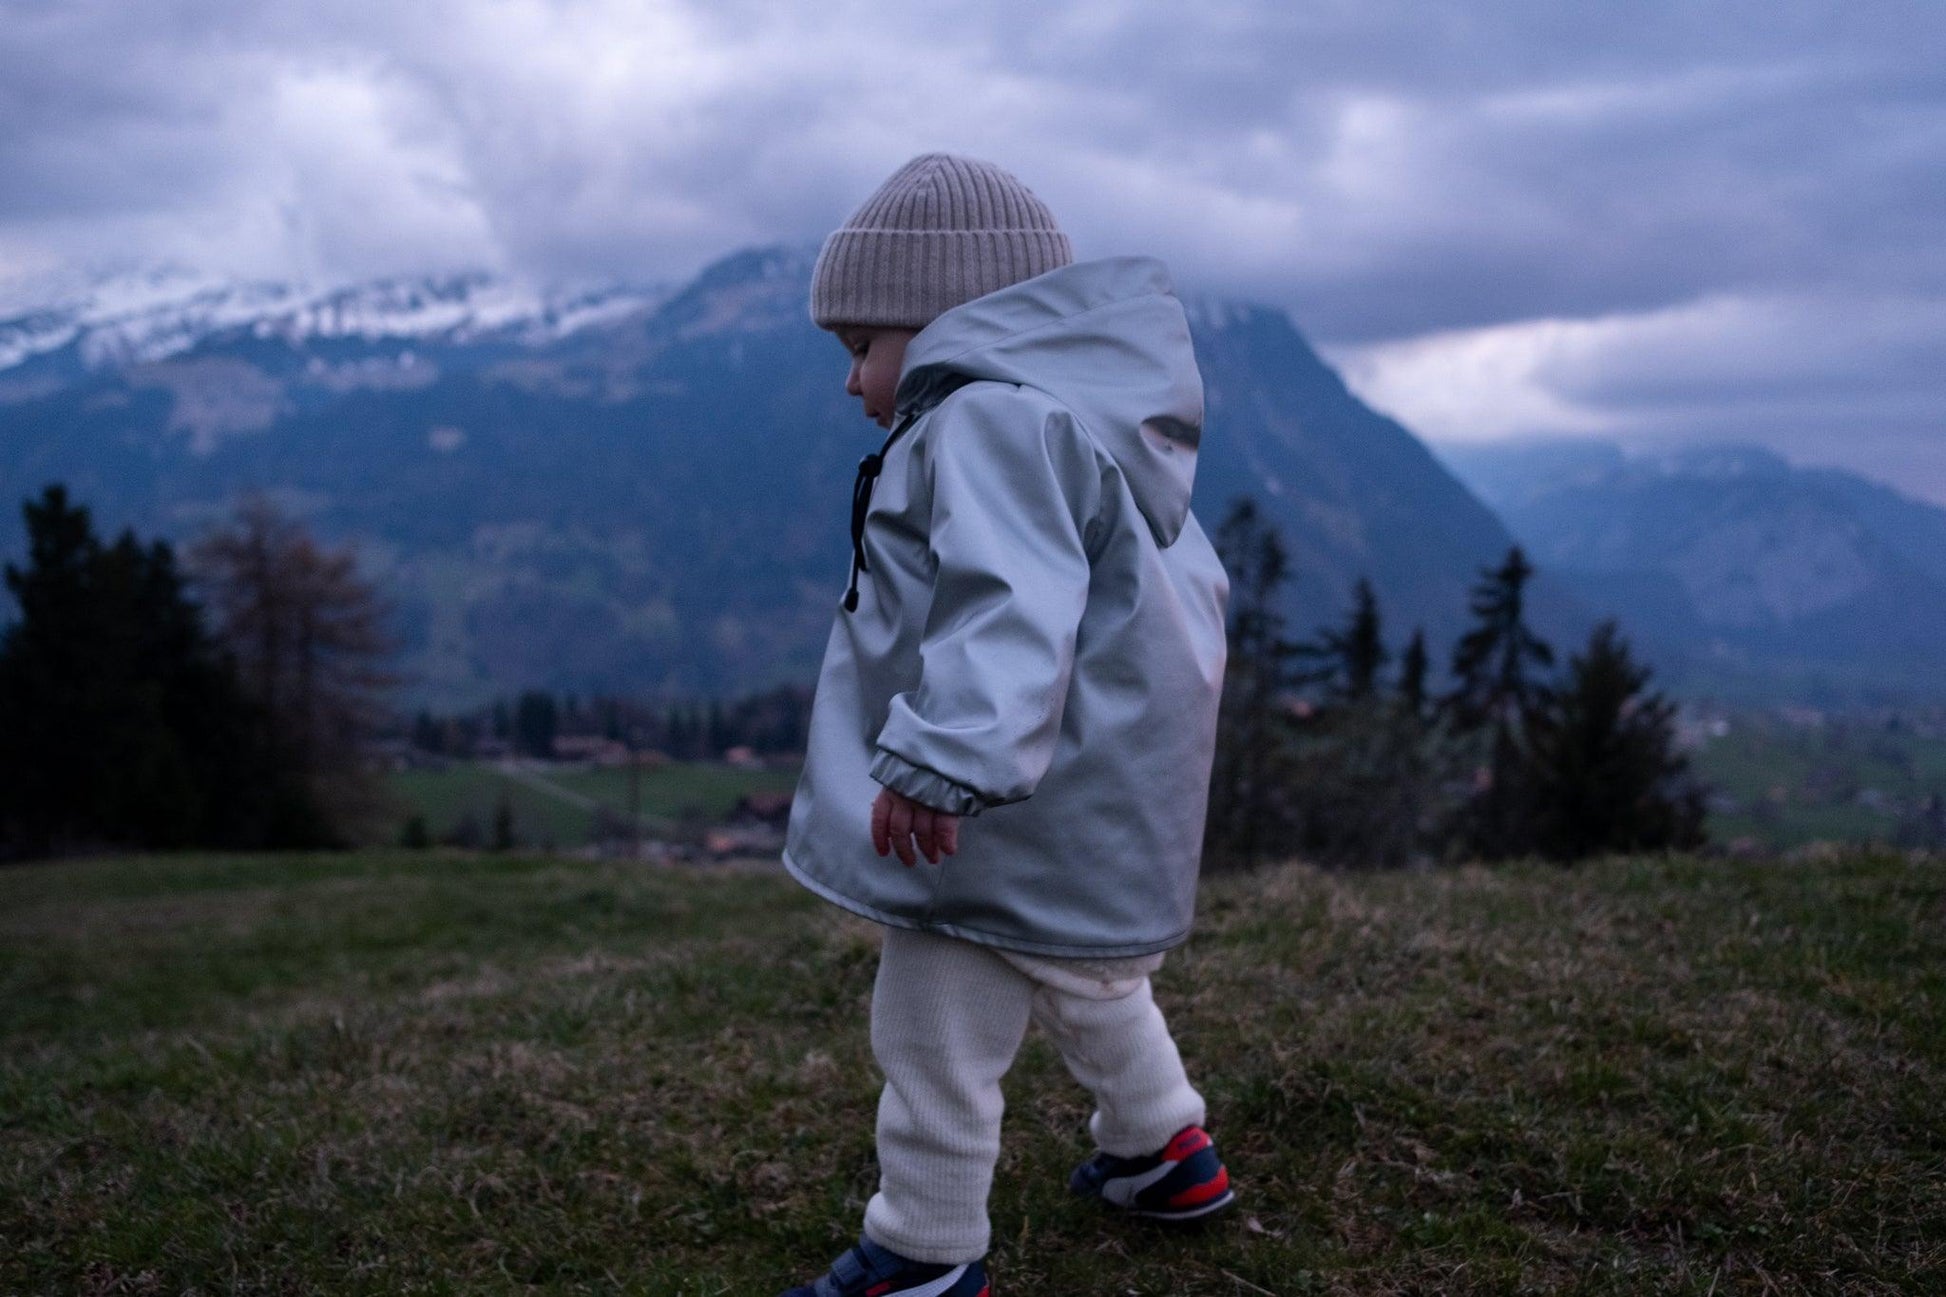 A toddler wearing a white merino wool beanie and a grey MellowConceptStore Waterproof Baby/Kid Clothing Set - Silver jacket is walking on grass with mountains visible in the background during dusk.